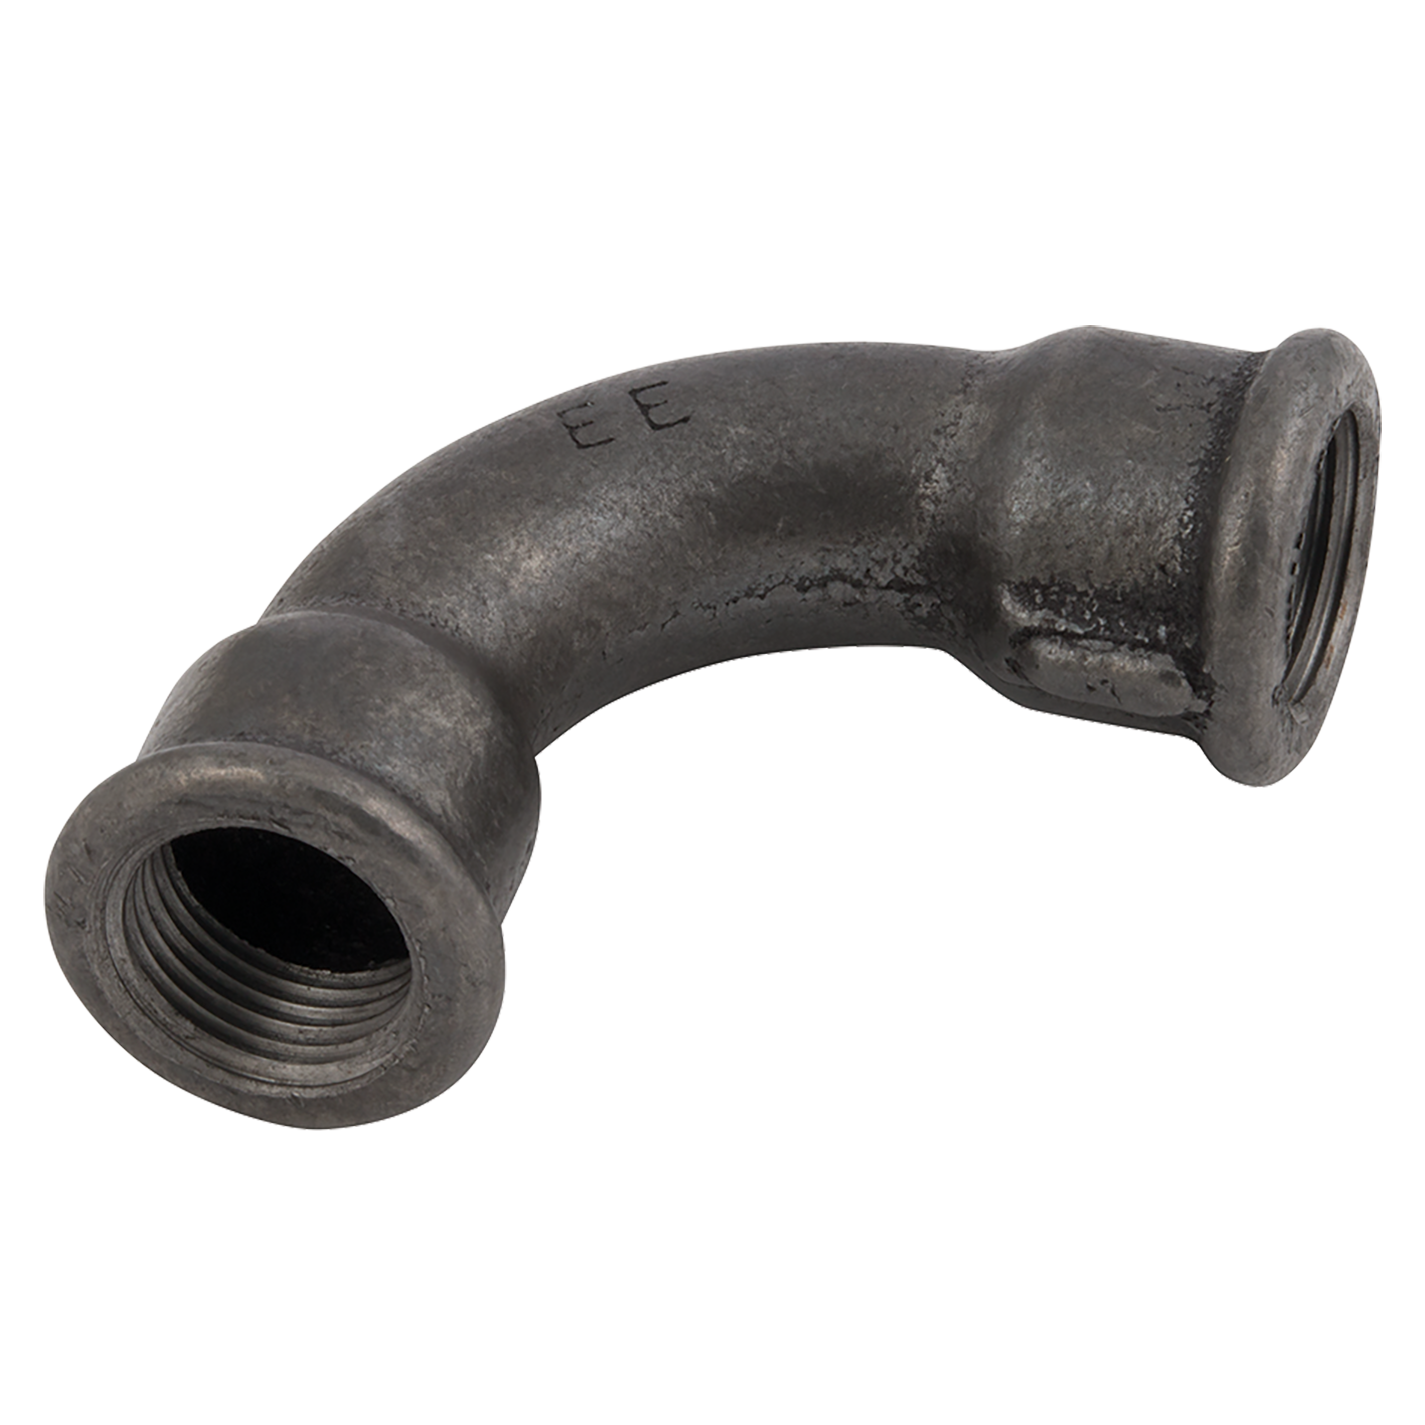 EQUAL 90 ELBOW M/F P/T 1.1/2"X1.1/2" G EE-MI92-112 EE-Brand Malleable Iron Fit 